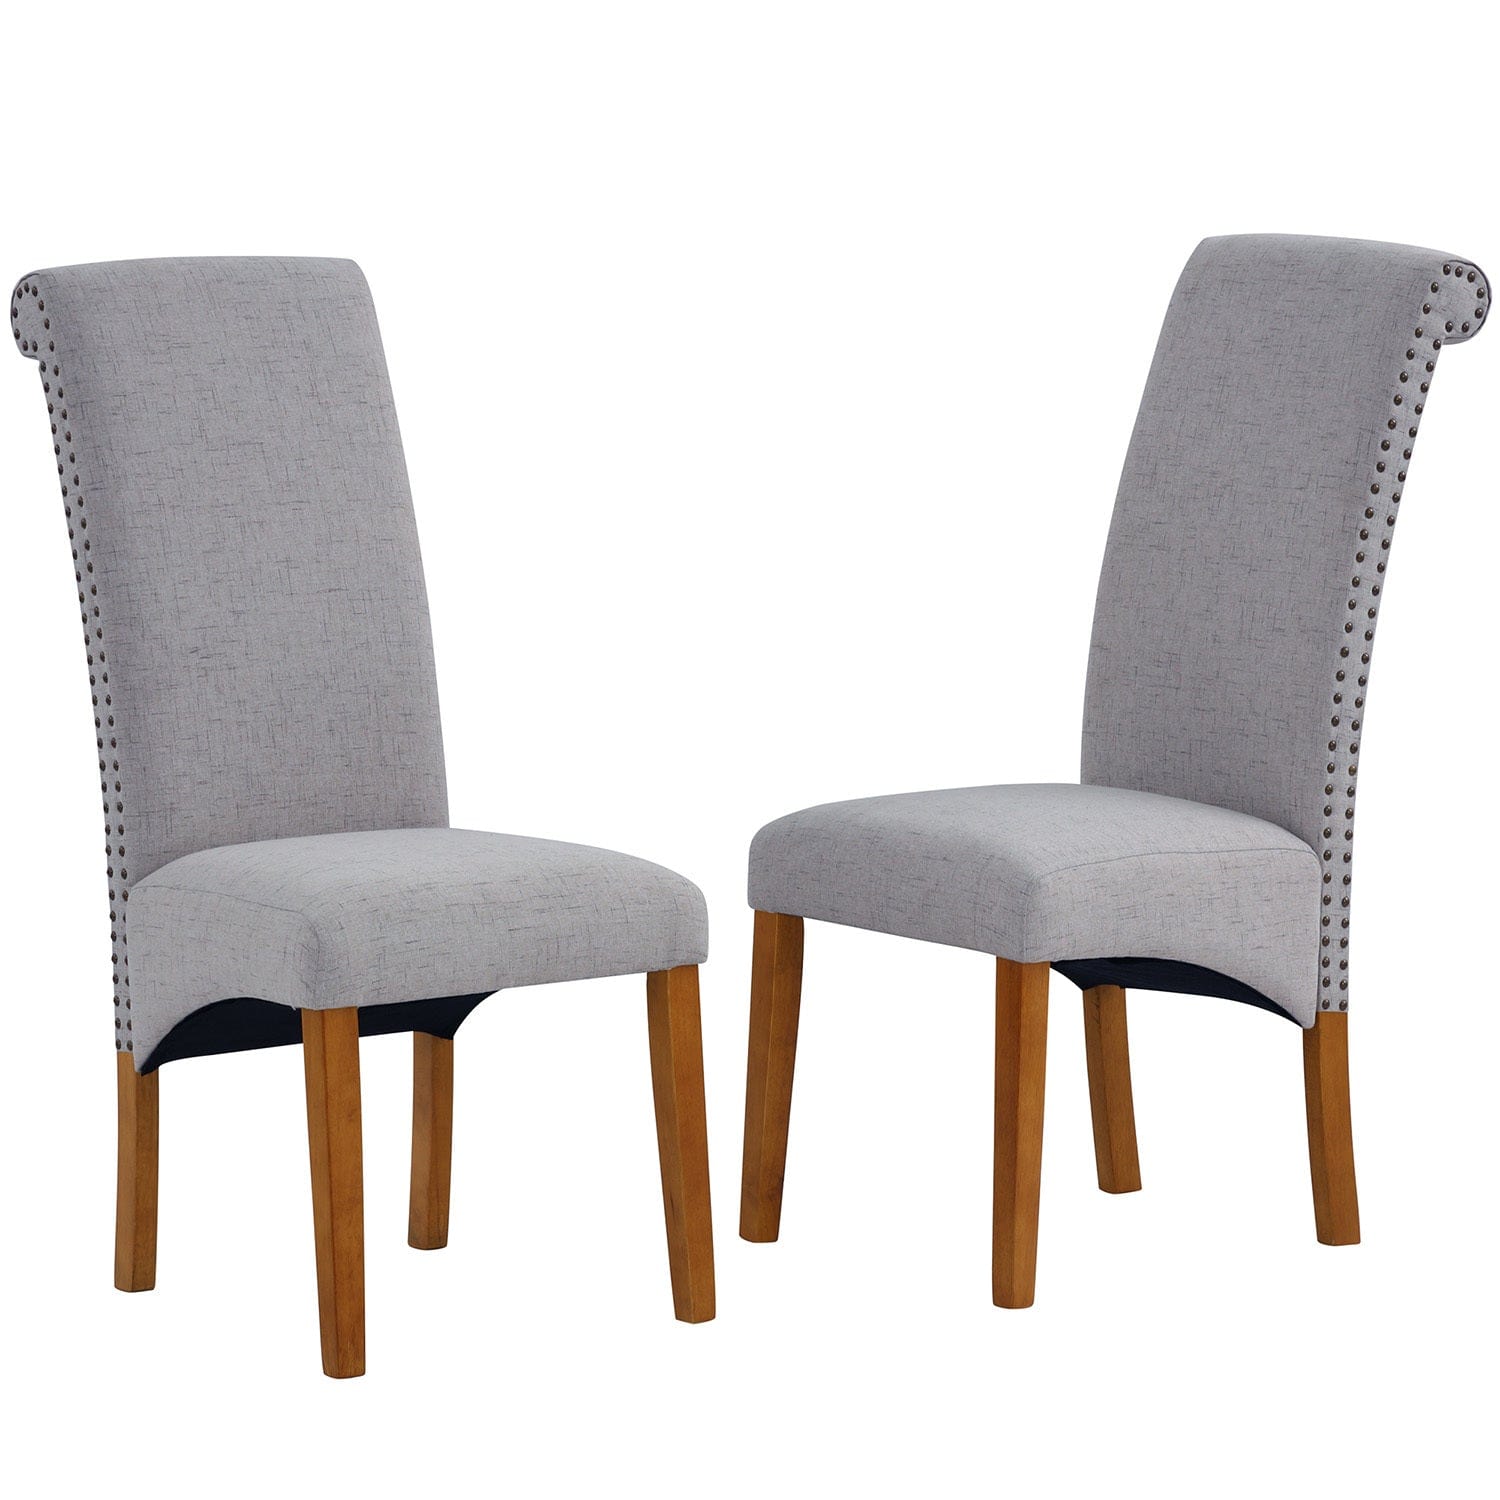 1st Choice Furniture Direct Dining Chairs 1st Choice Set of 2 Upholstered Dining Chairs w/ Wood Leg, Padded Seat